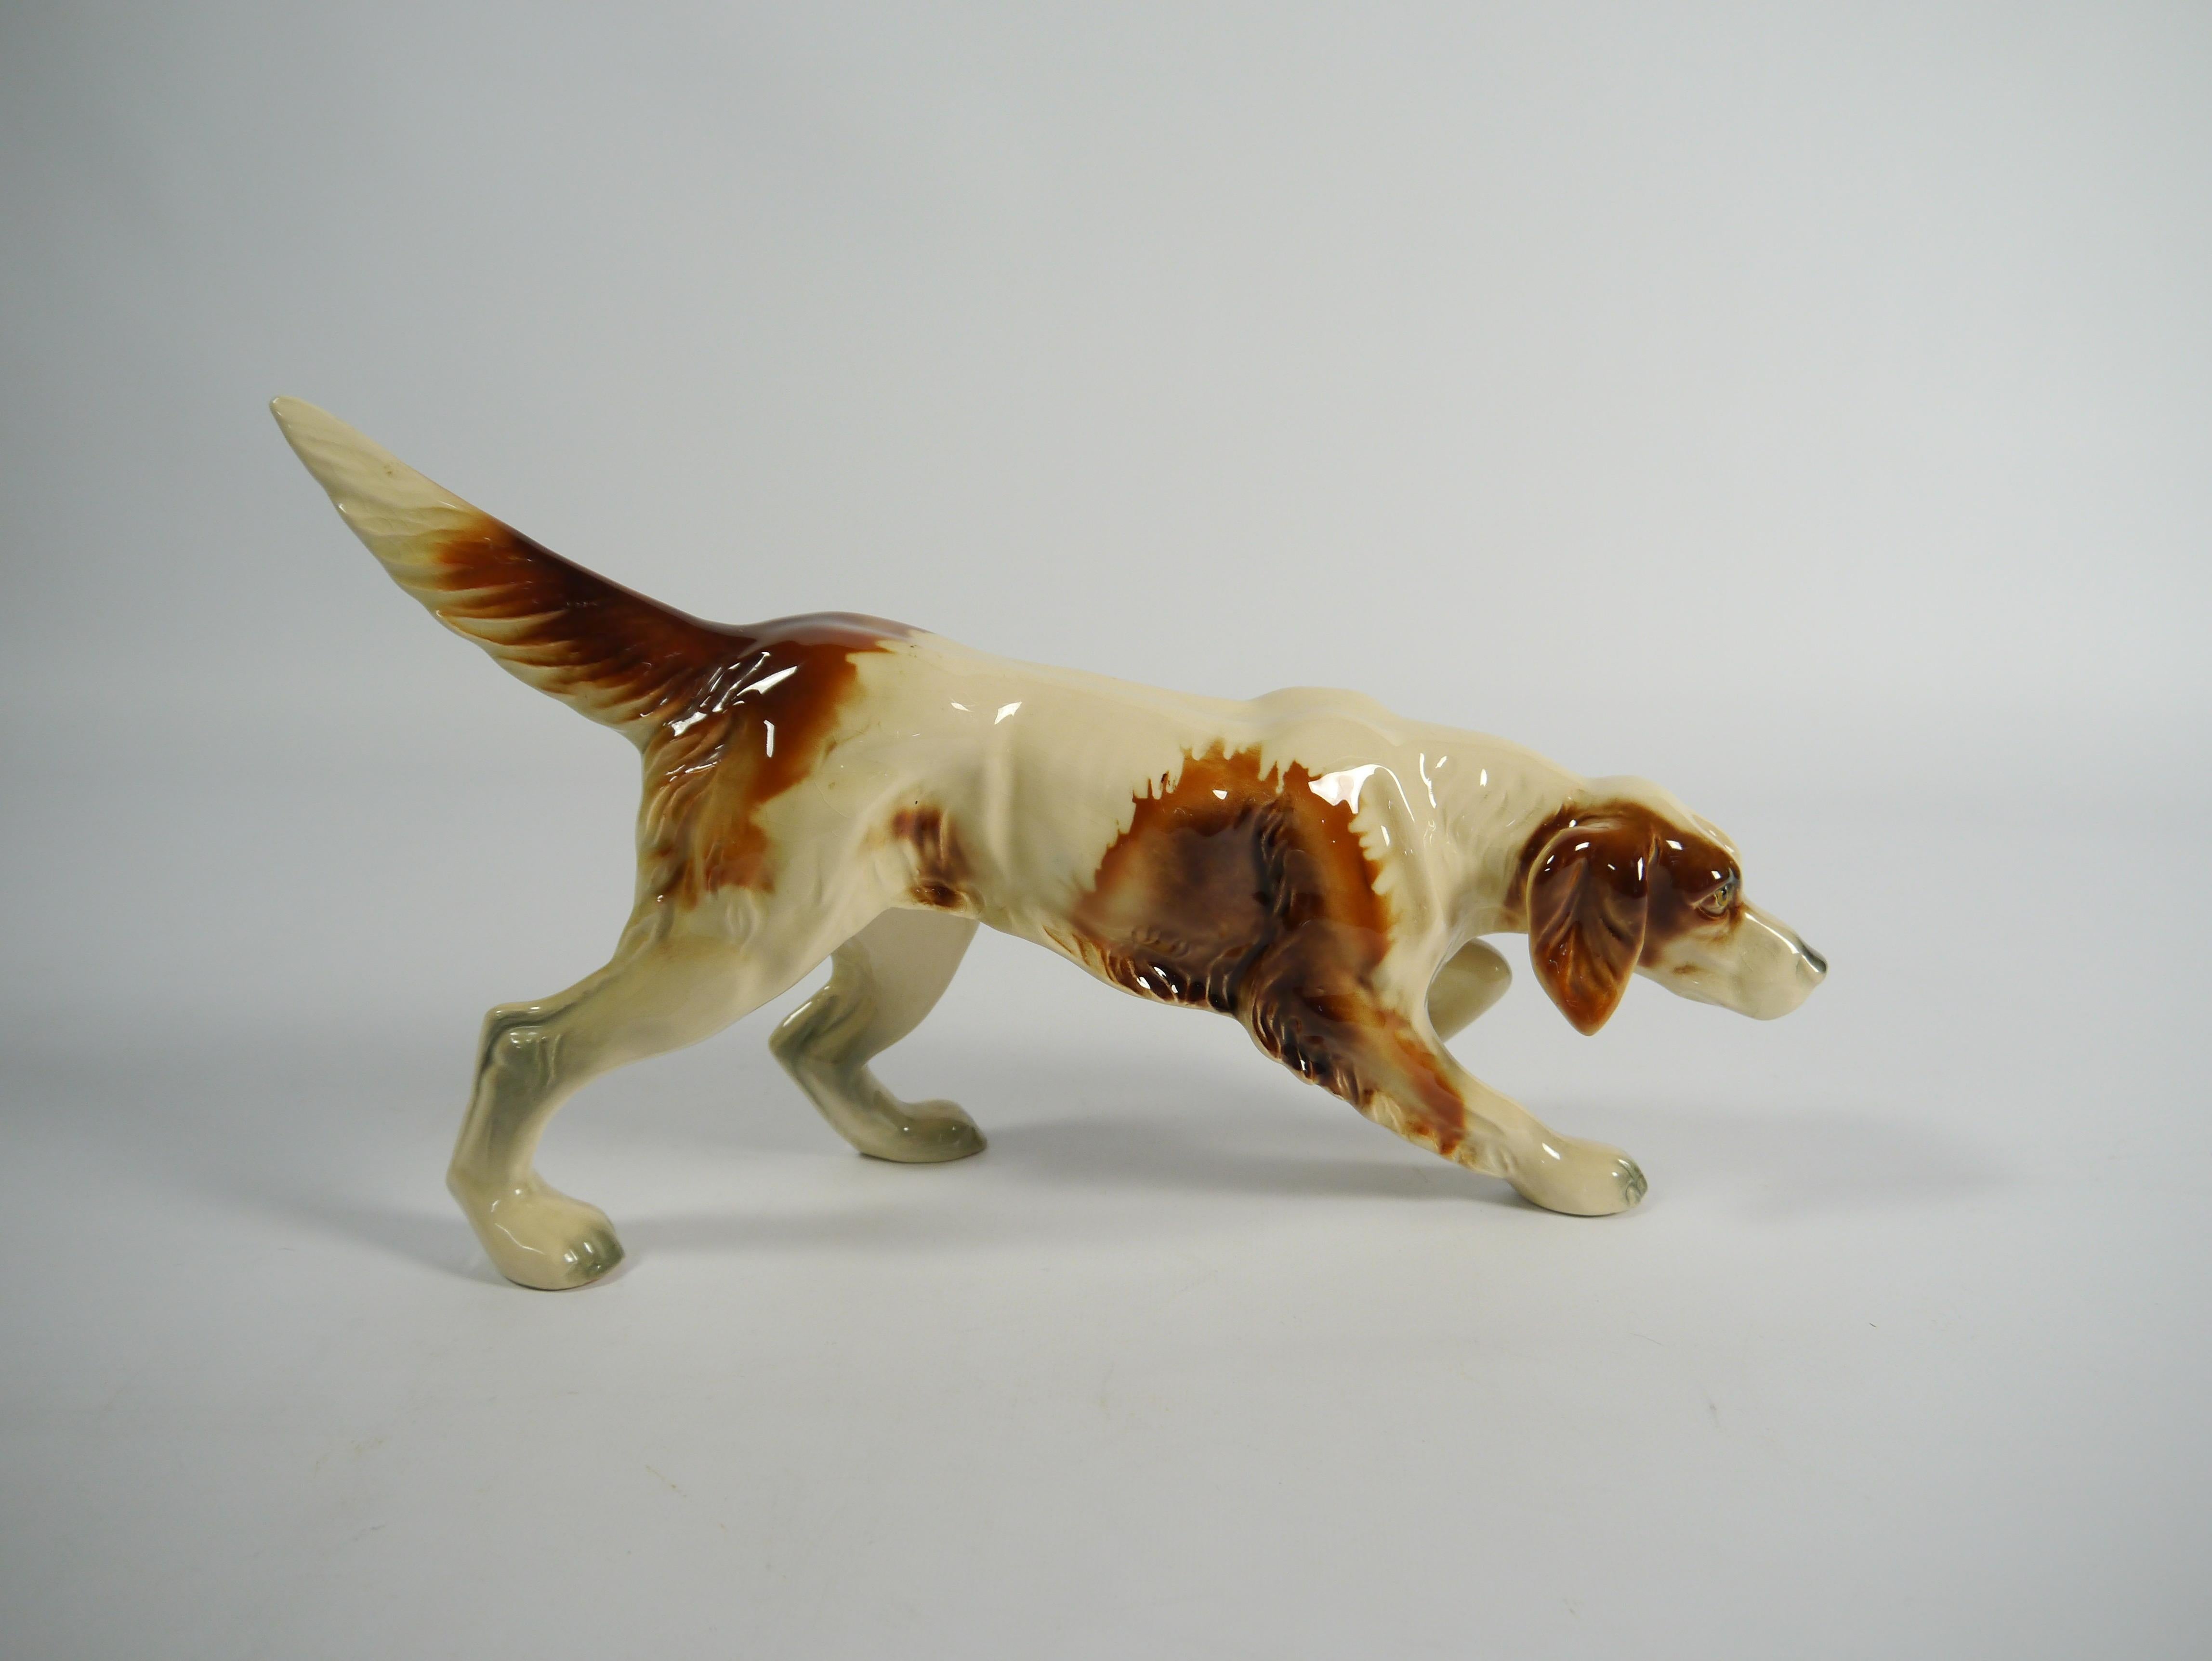 Porcelain foxhound dog figurine, depicted in a lifelike hunting / searching pose. Beautifully crackled and patinated porcelain. Marked 